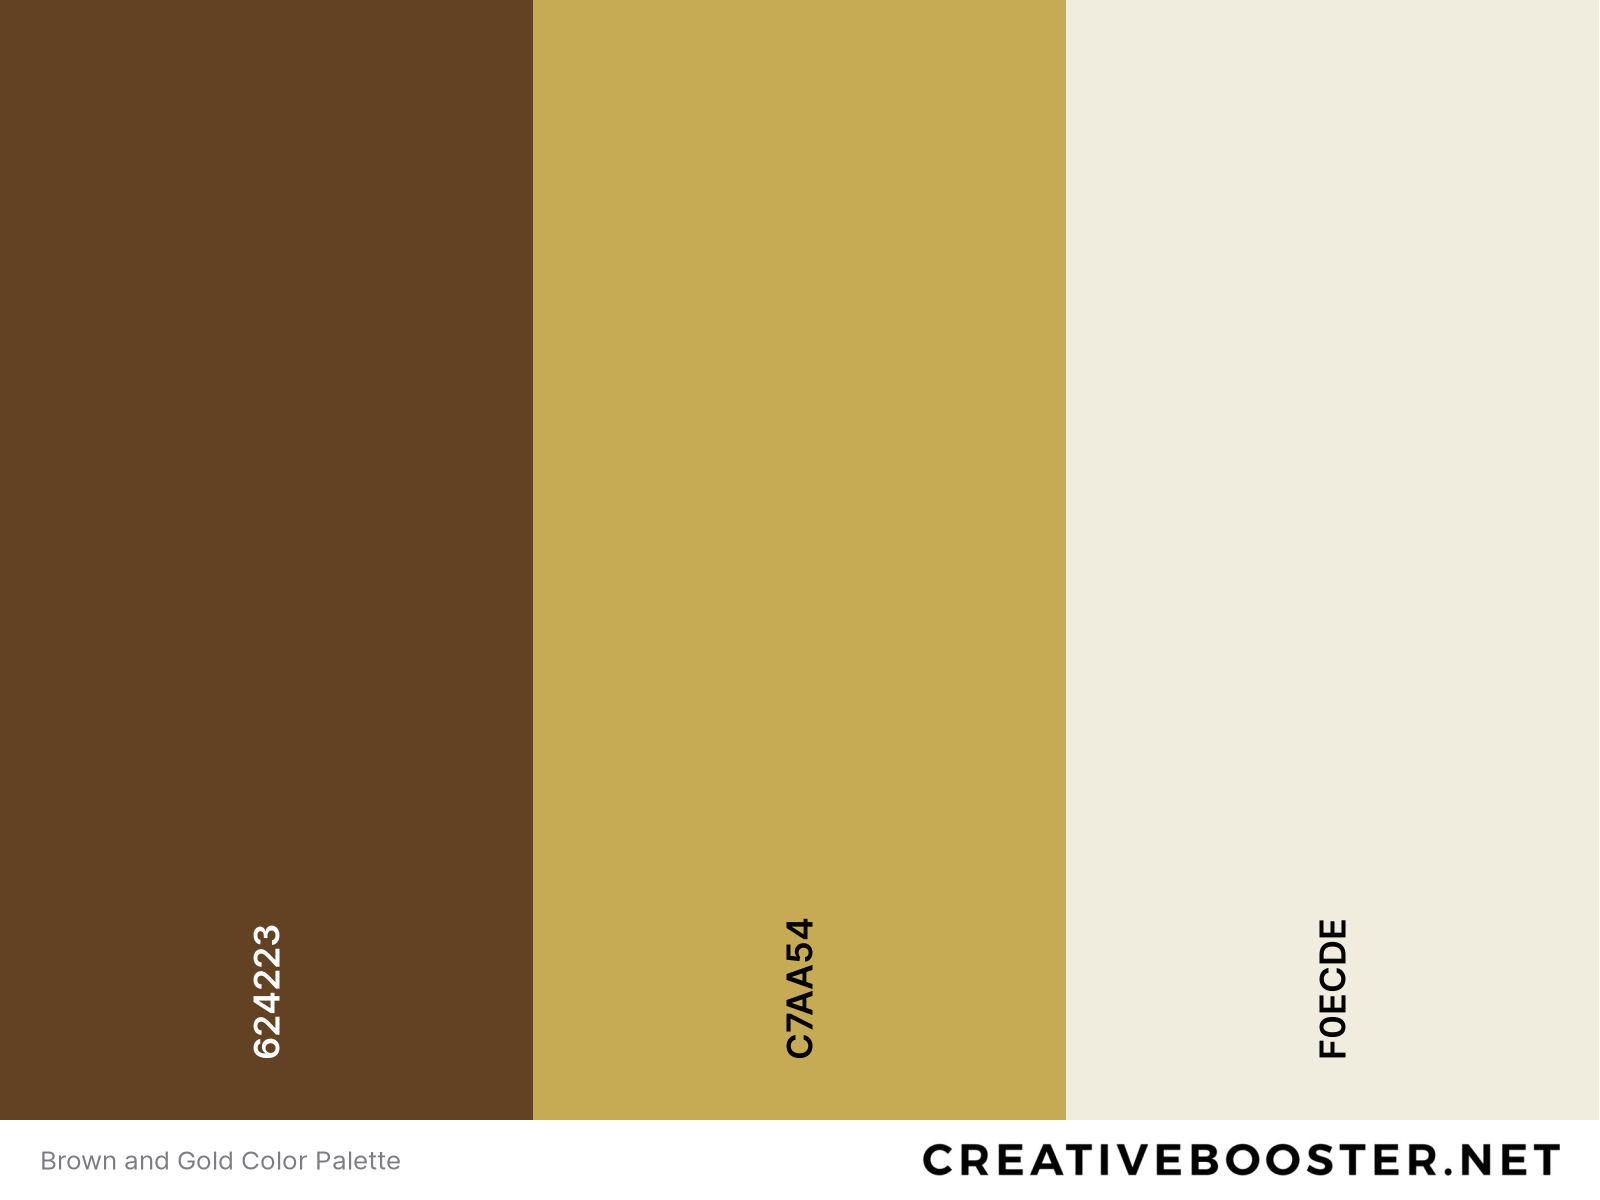 Brown and Gold Color Palette